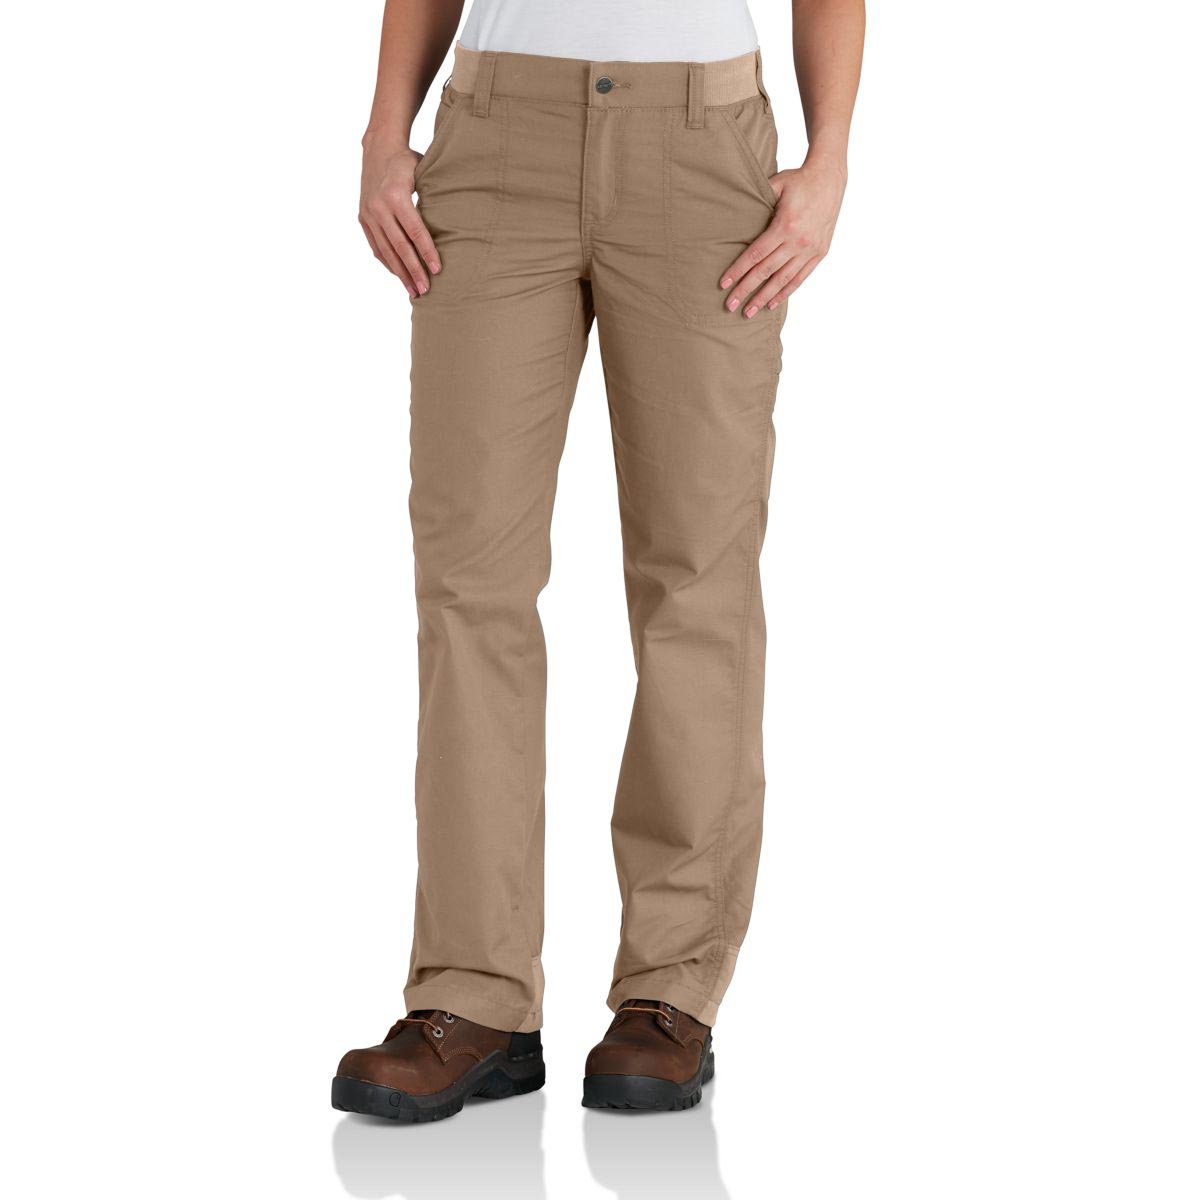 Carhartt Women's Force Extremes Pants